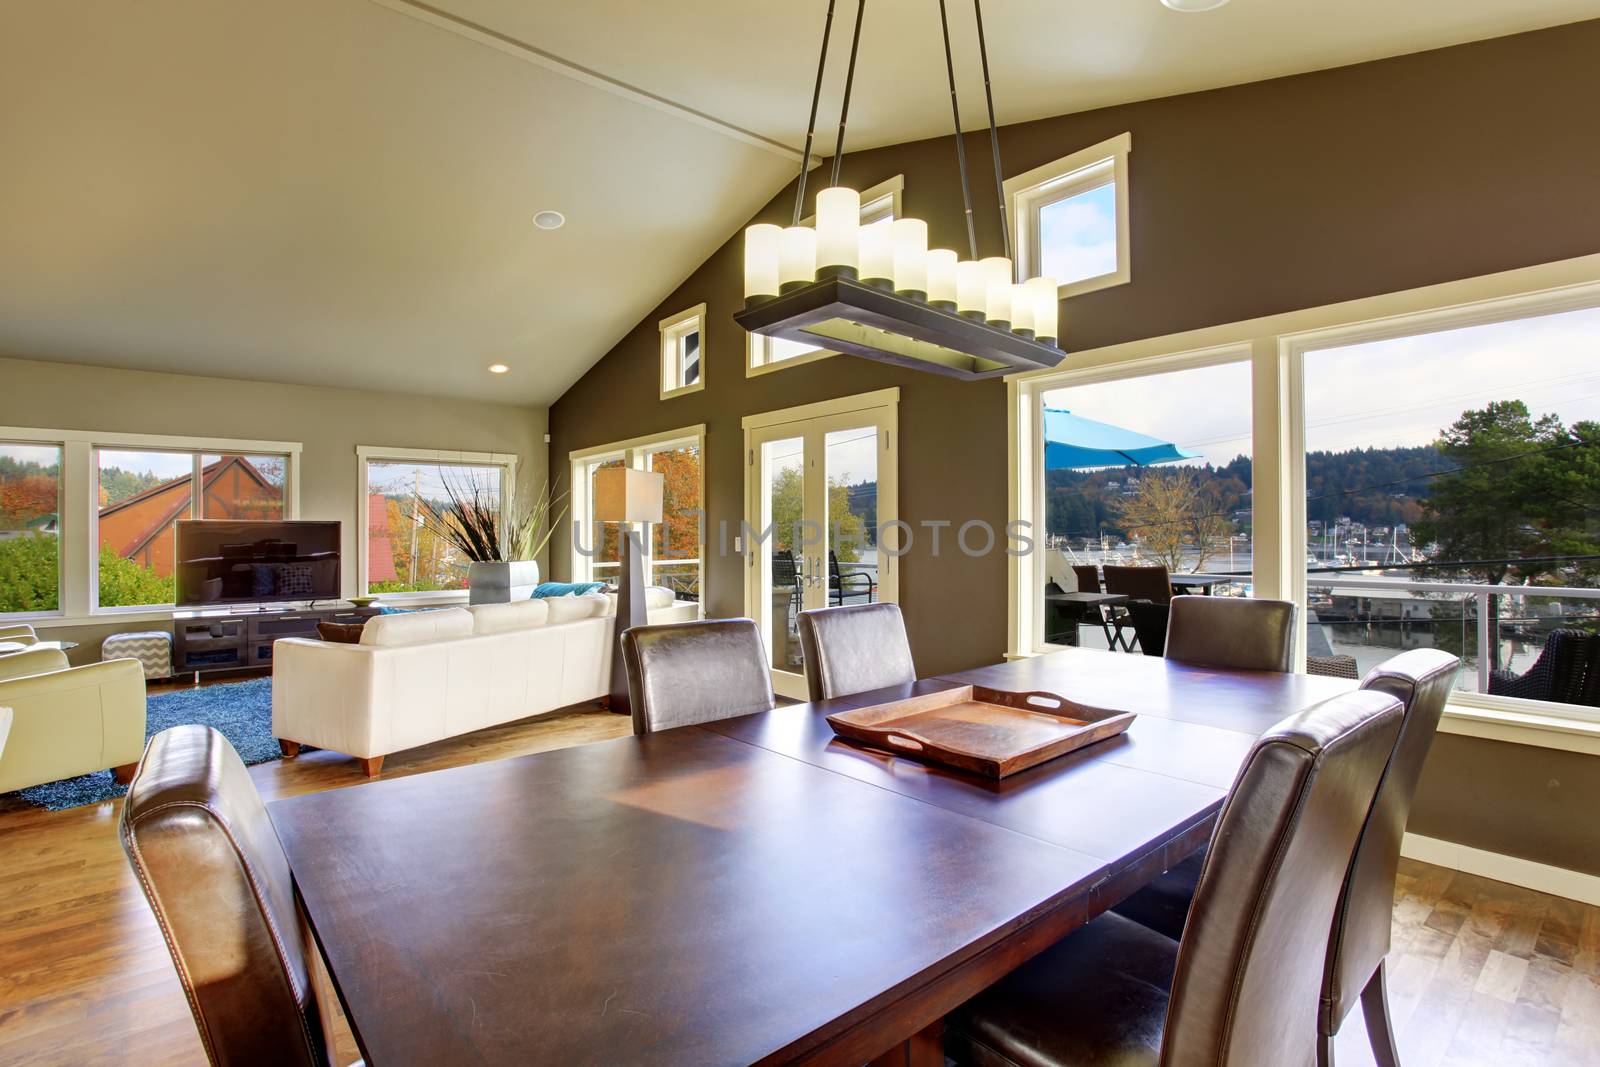 Beautiful bright furnished dinning room with windows and wooden floor.